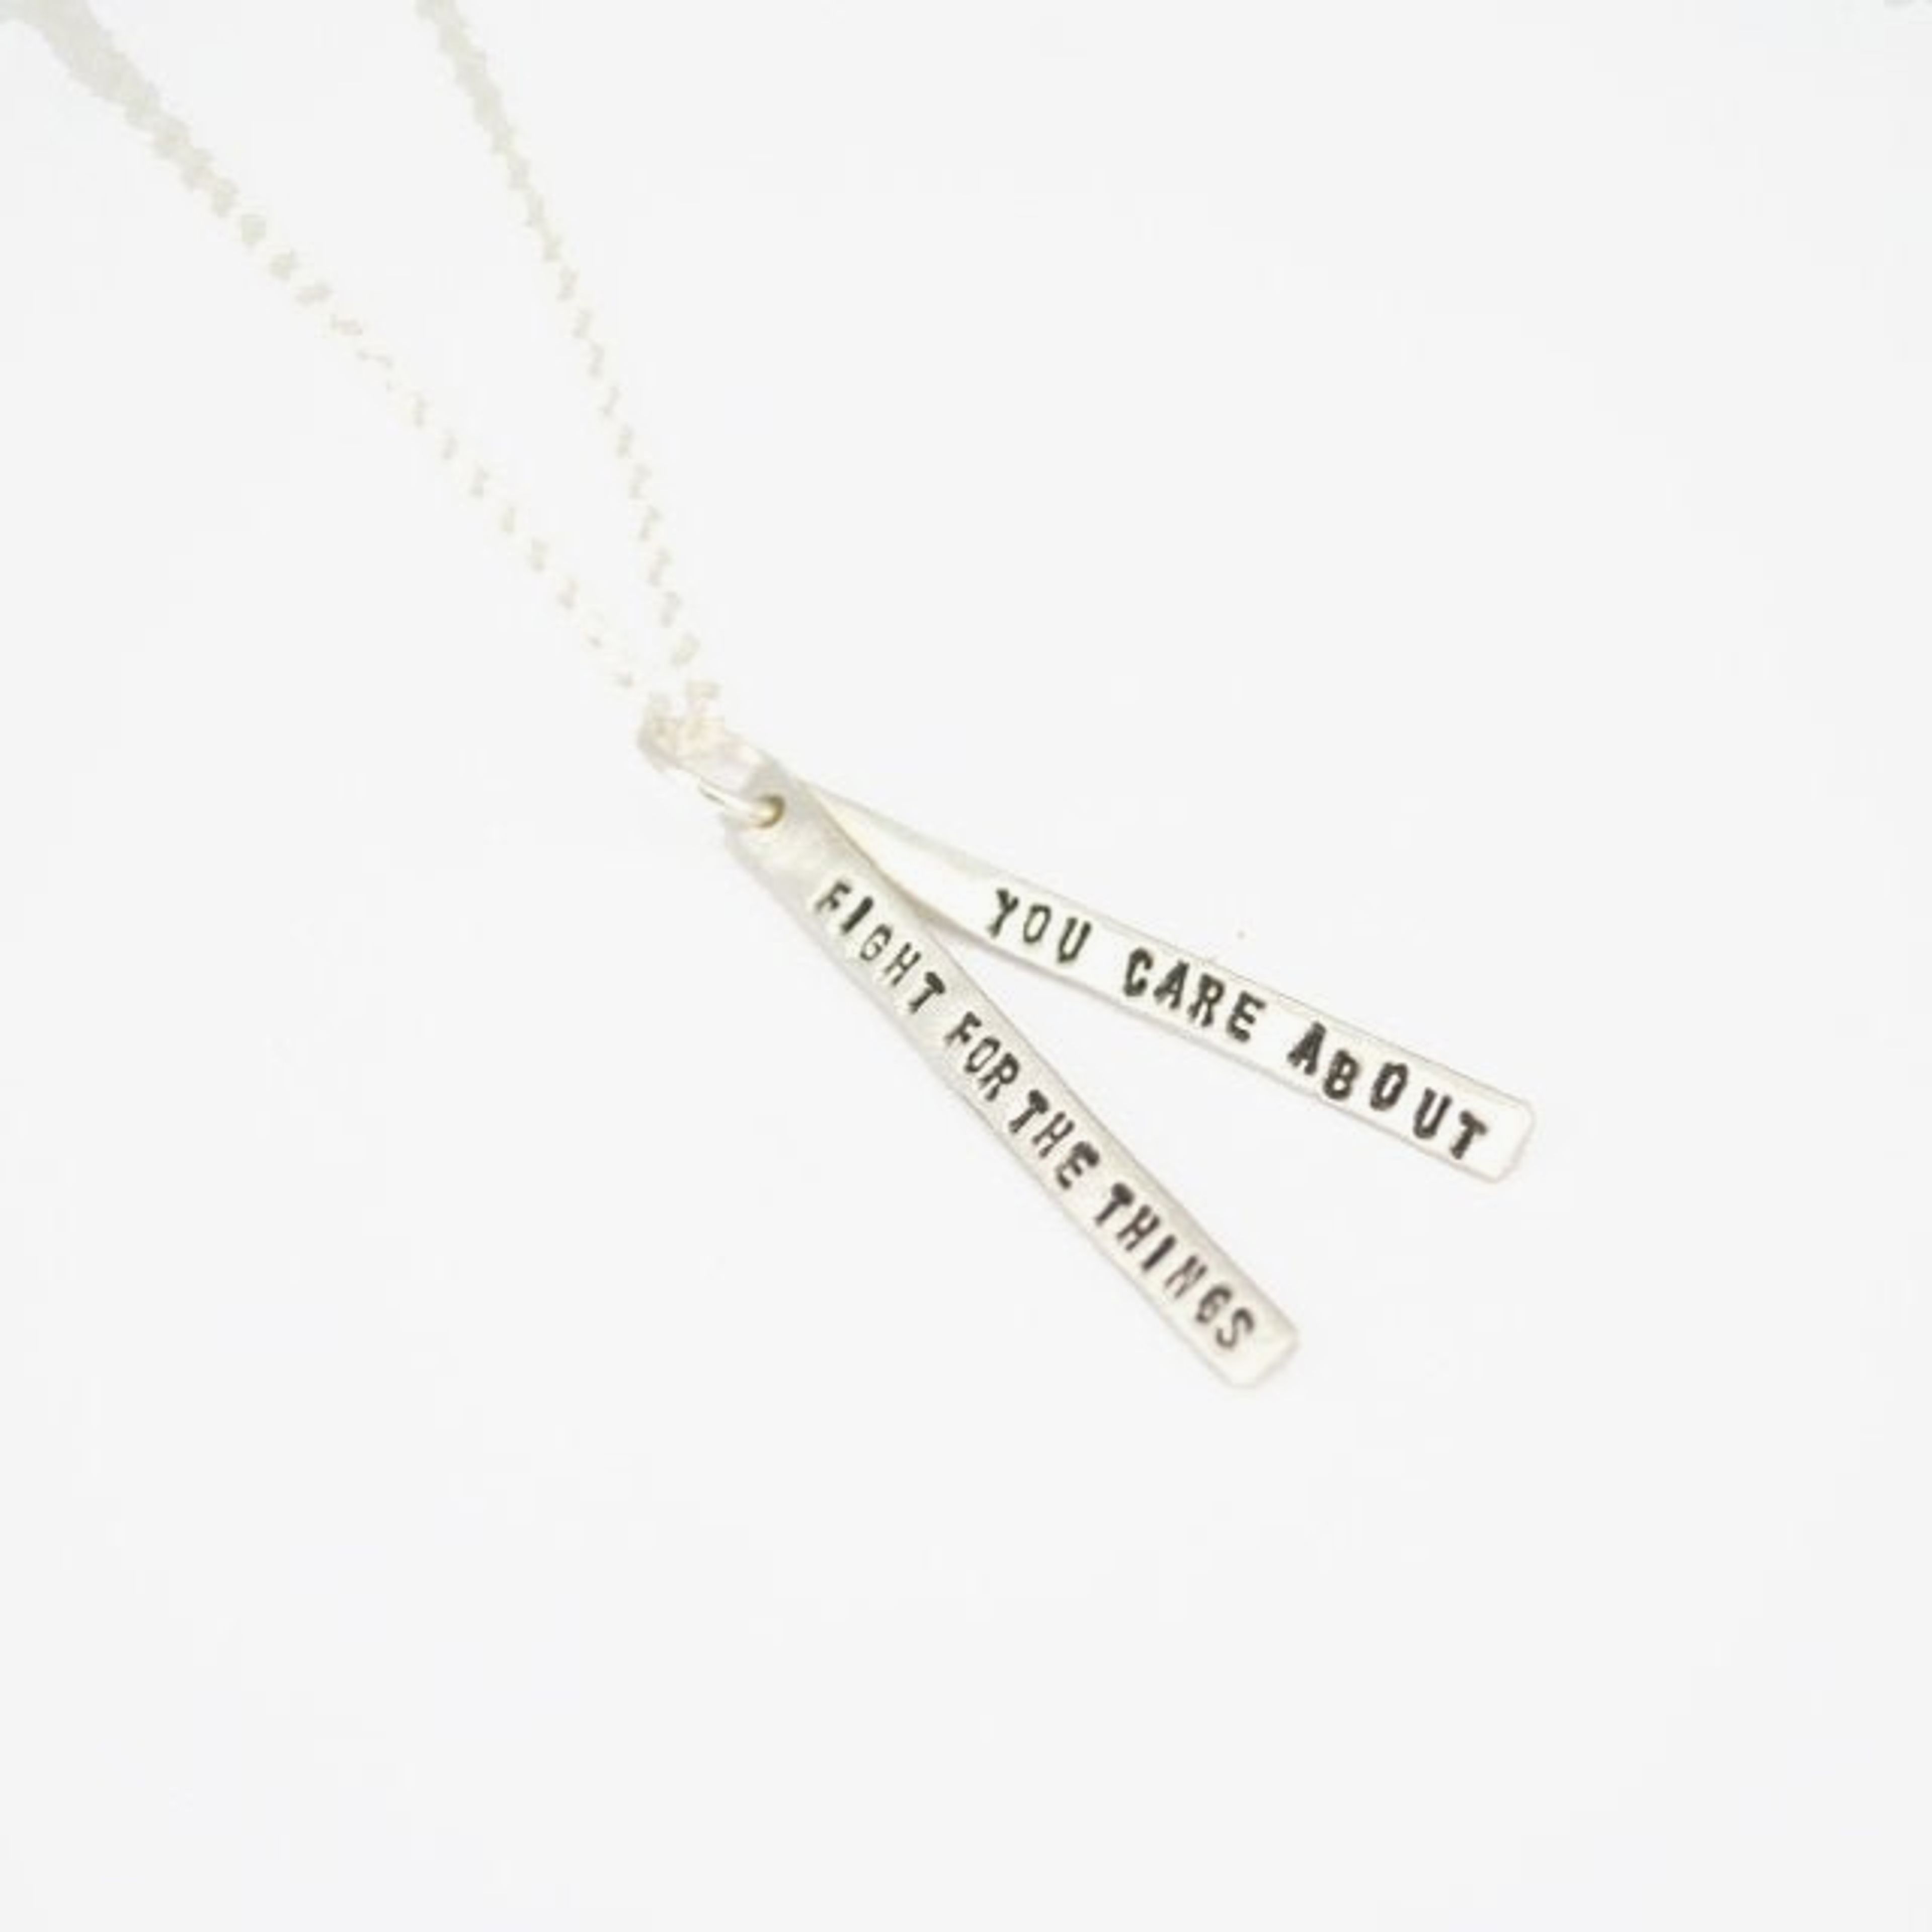 "Fight for the things you care about" -Ruth Bader Ginsburg quote necklace